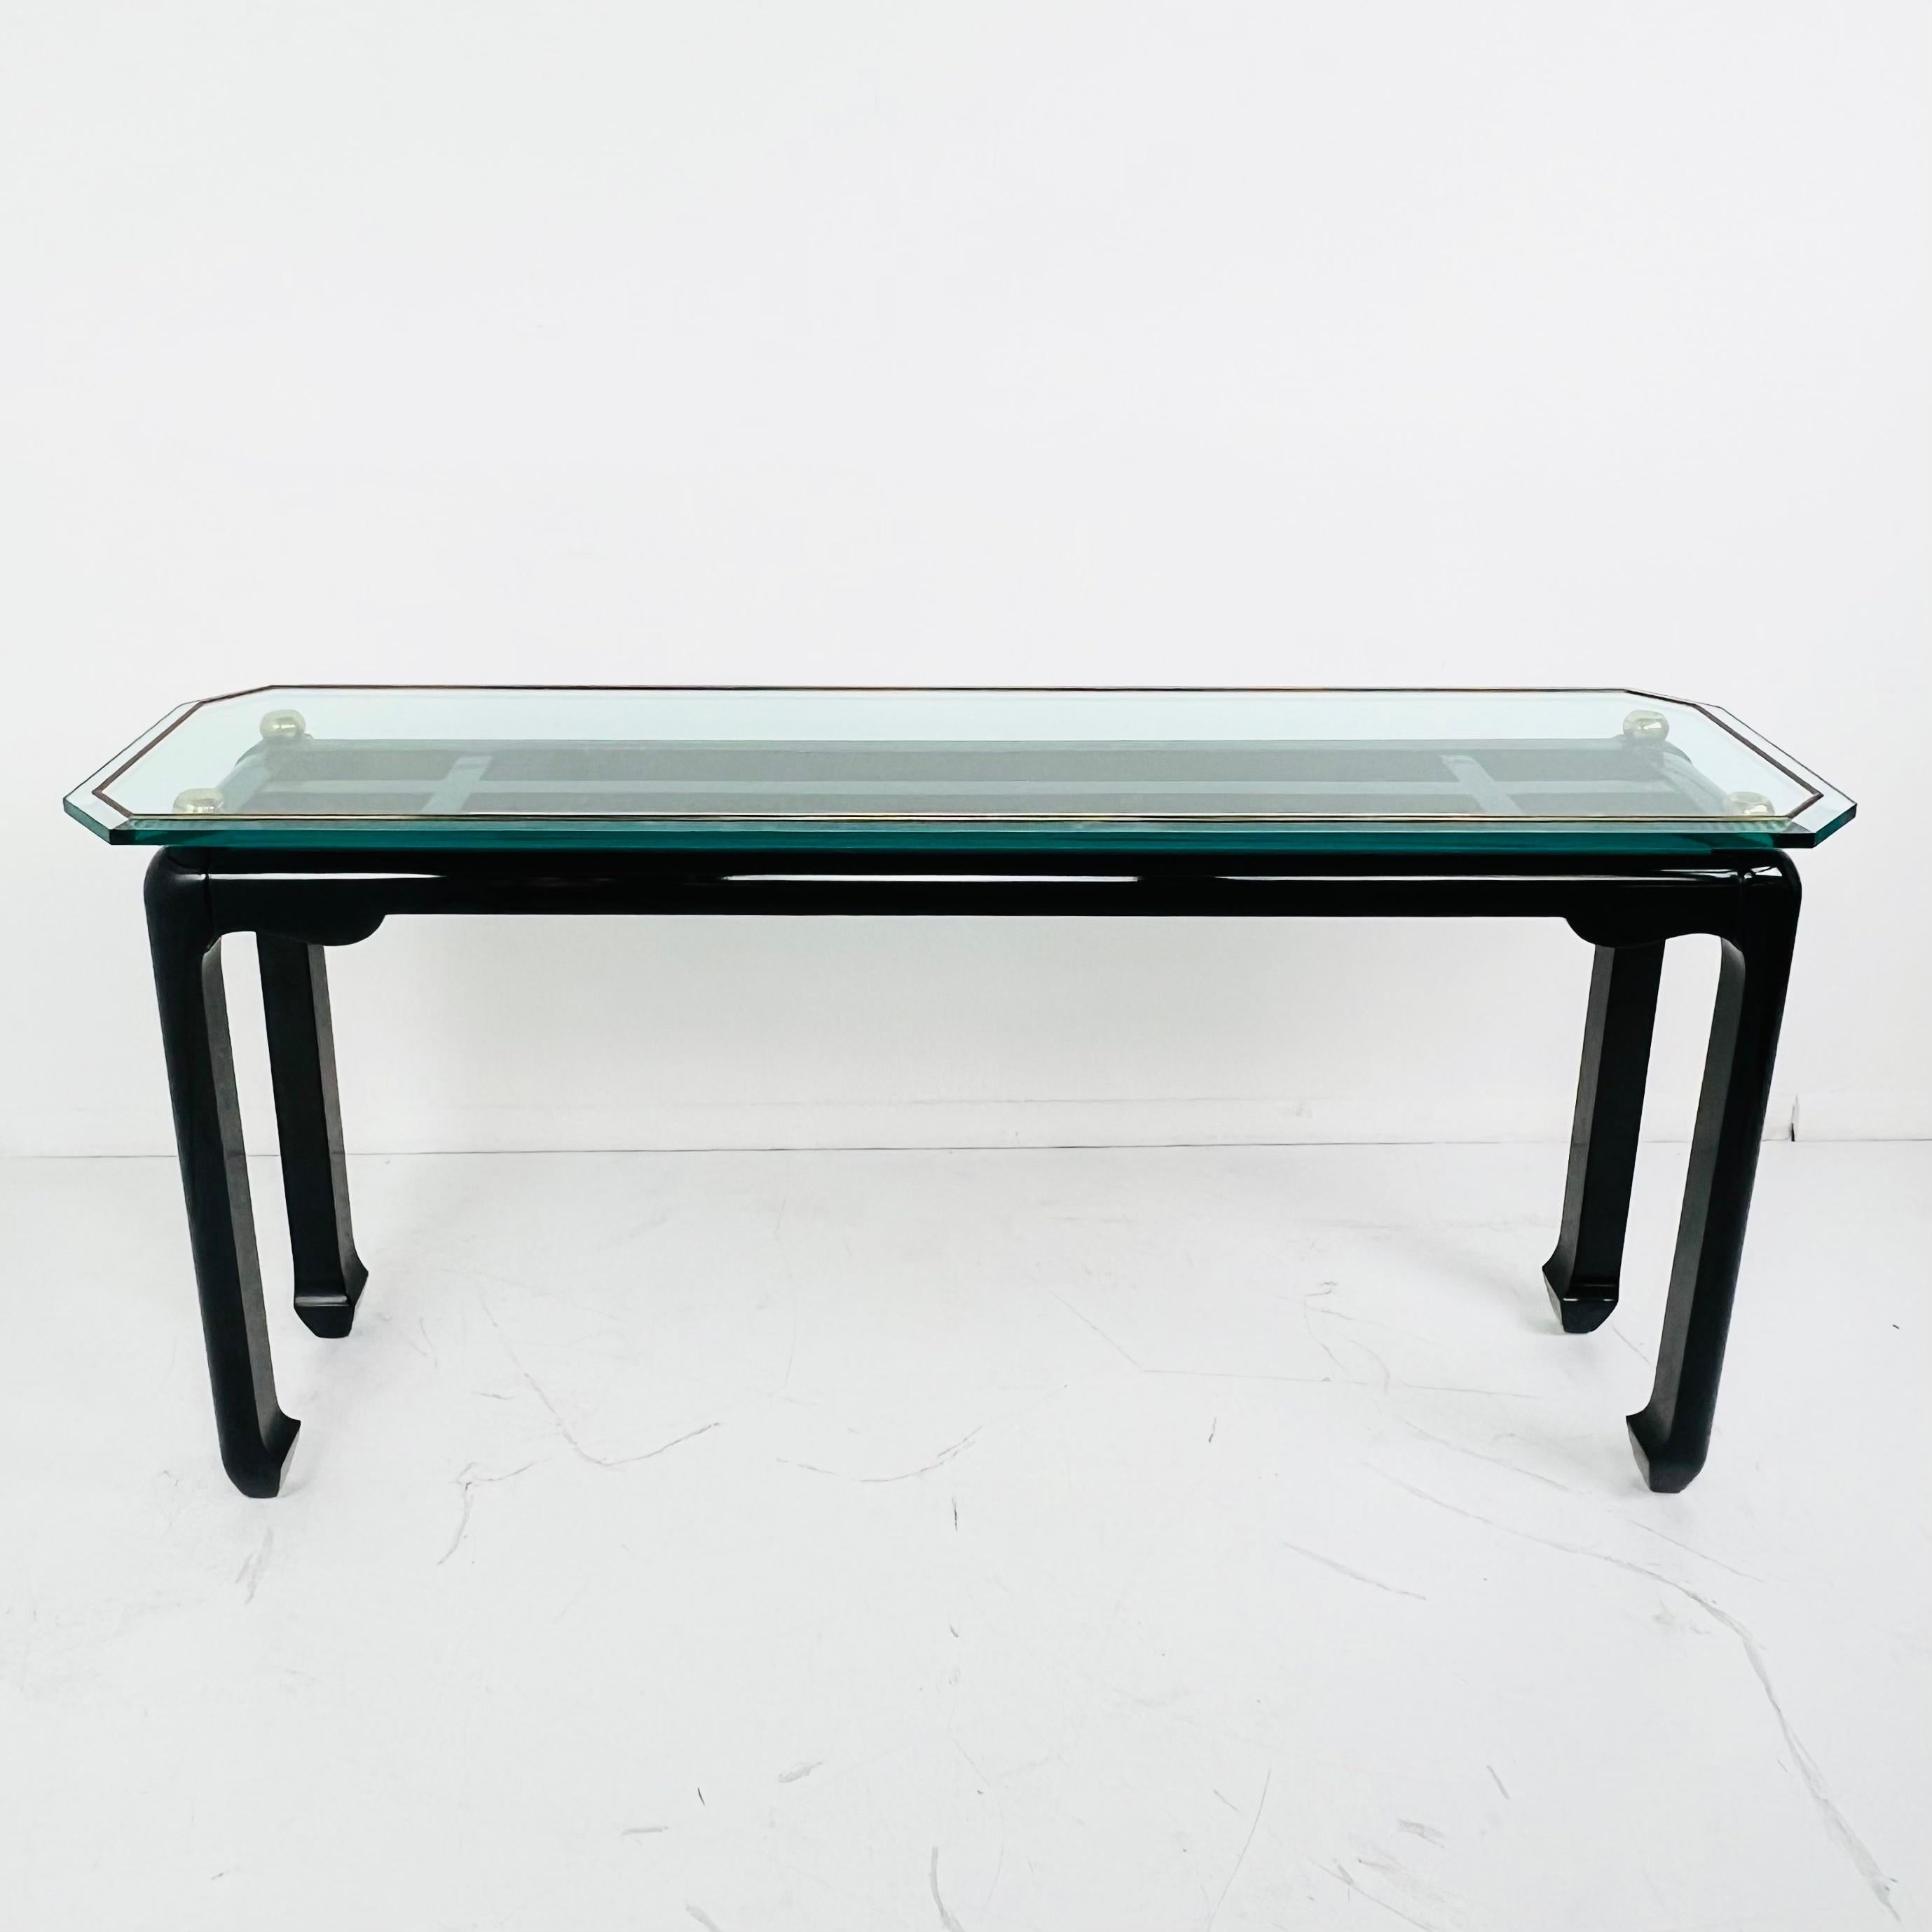 Very handsome console or sofa table in the style of James Mont. Black lacquer Asian style base with brass trim and glass top. Beveled glass top sits on round brass corner finials. Very good vintage condition with some wear (scratches, dings)